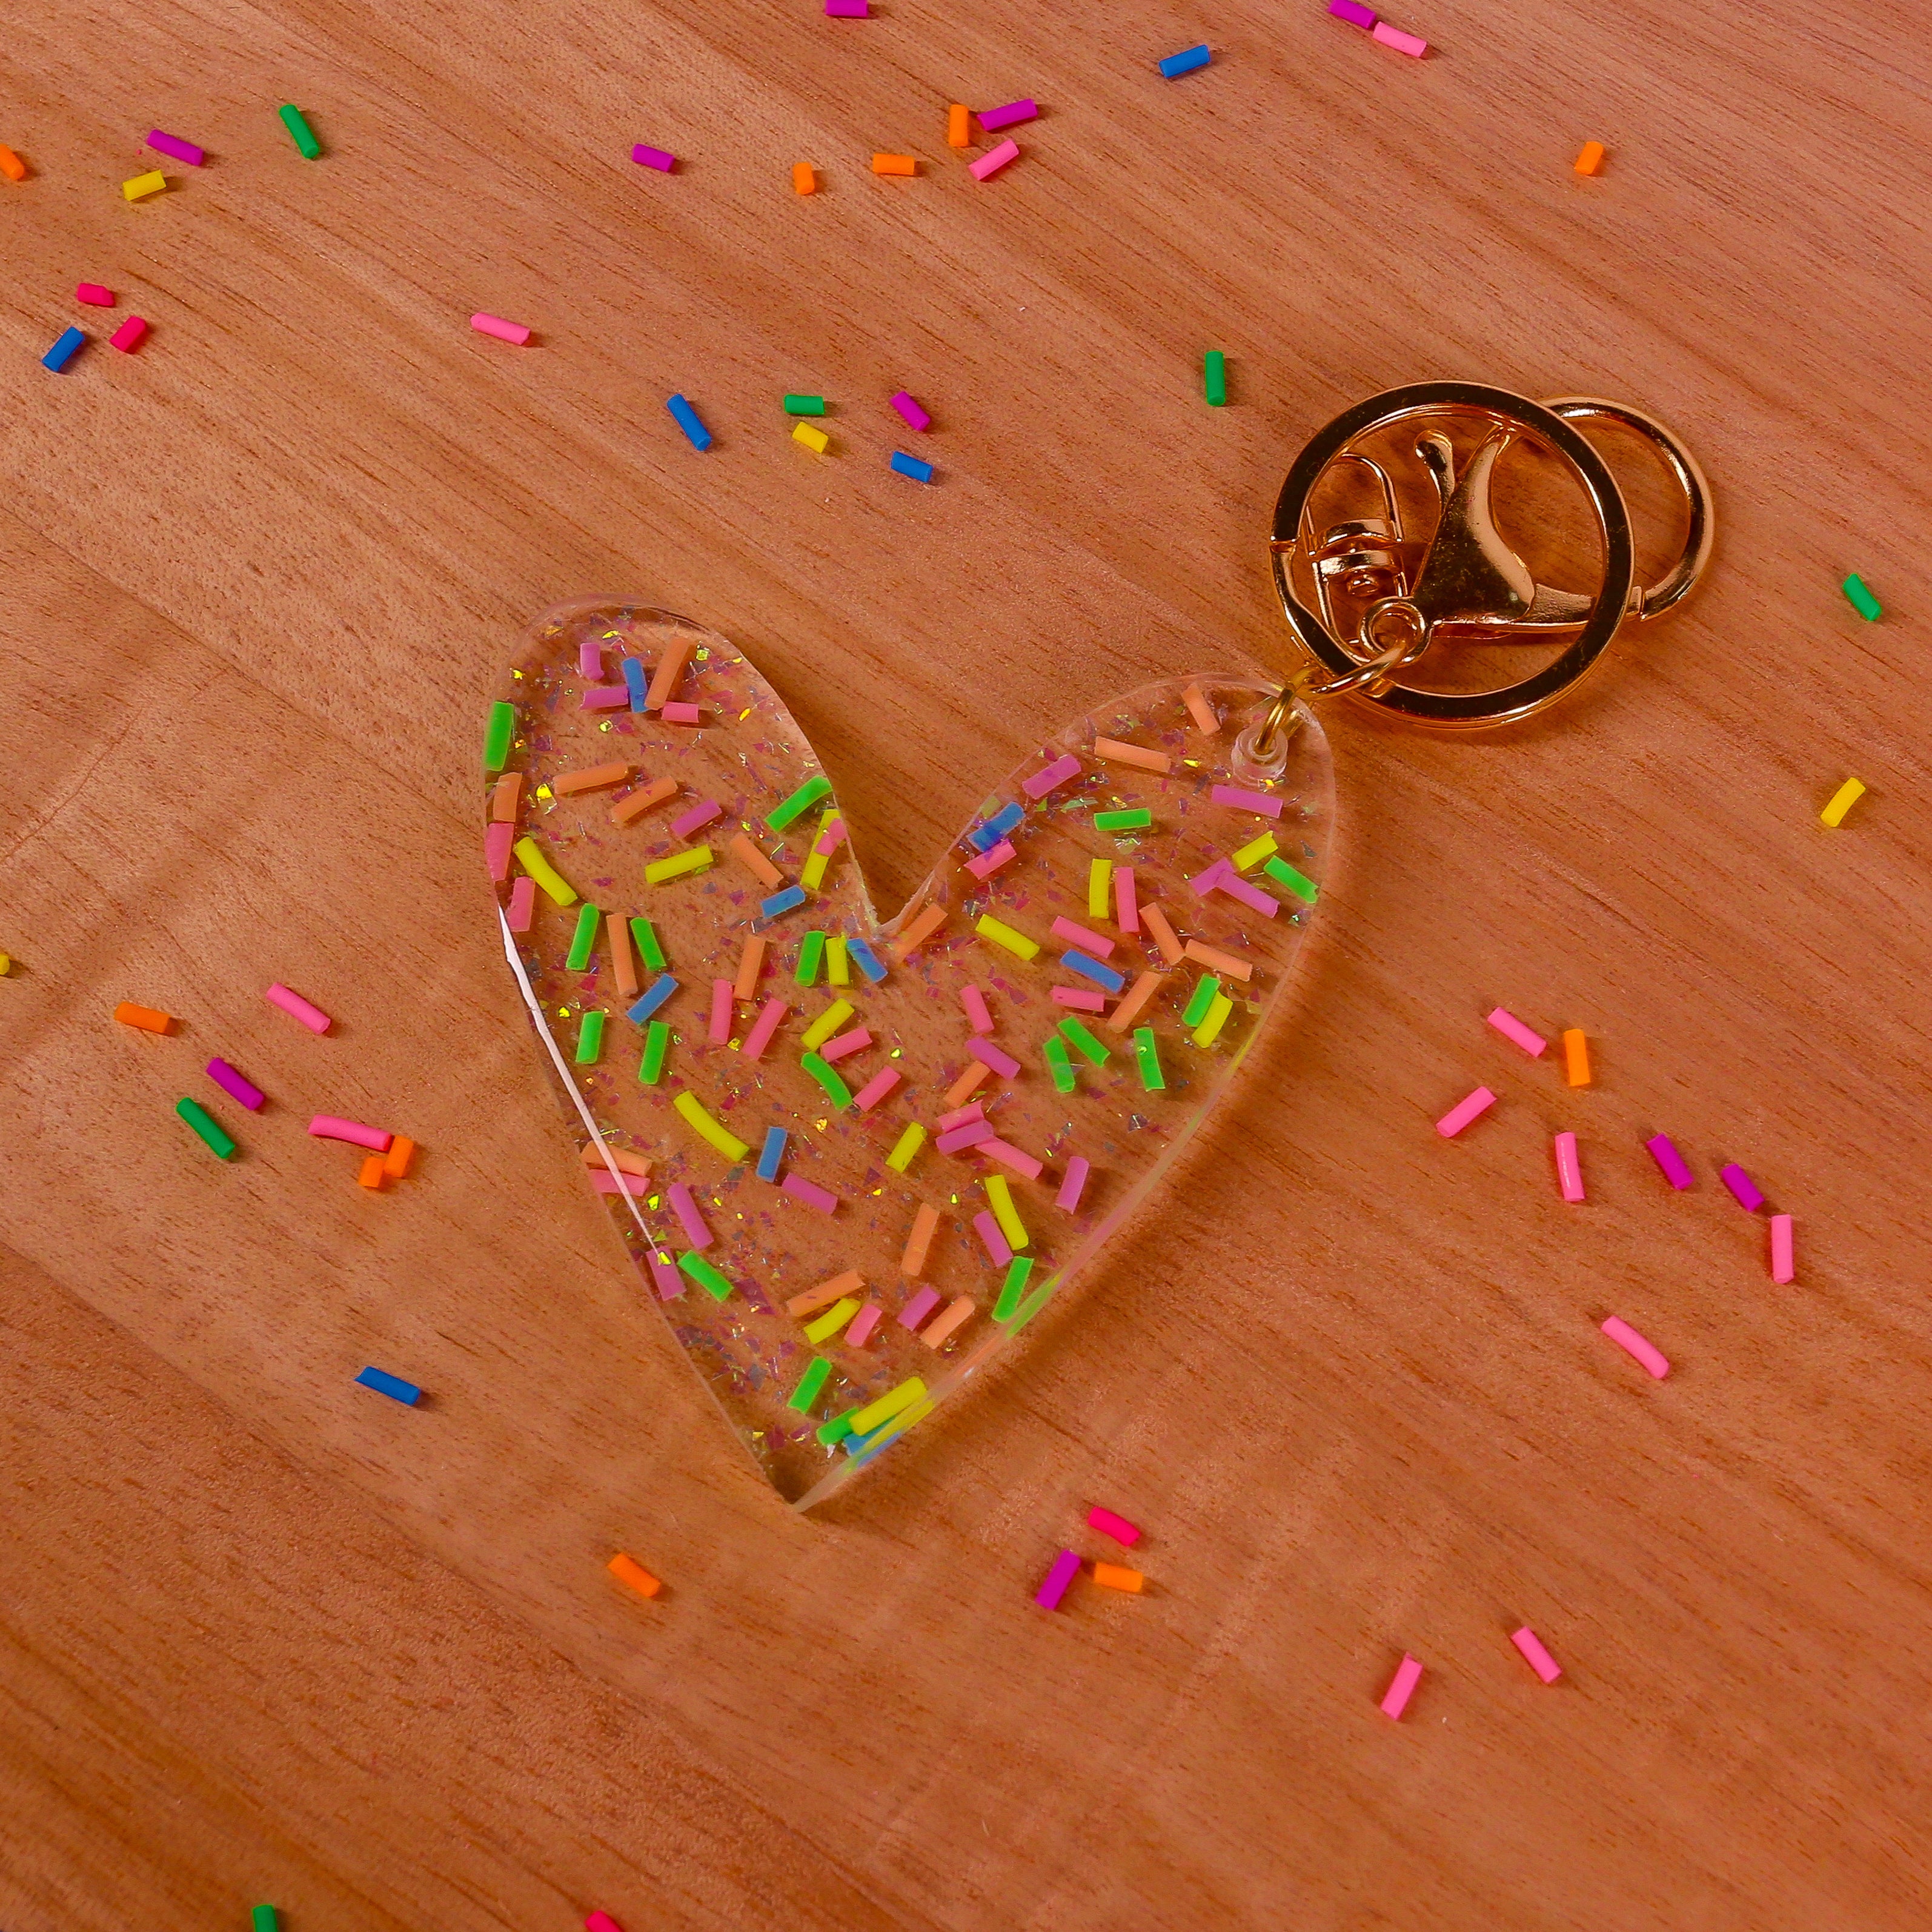 SPRINKLES HEART KEY RING  - LOLLY POLLY X NEON HEART DESIGNS